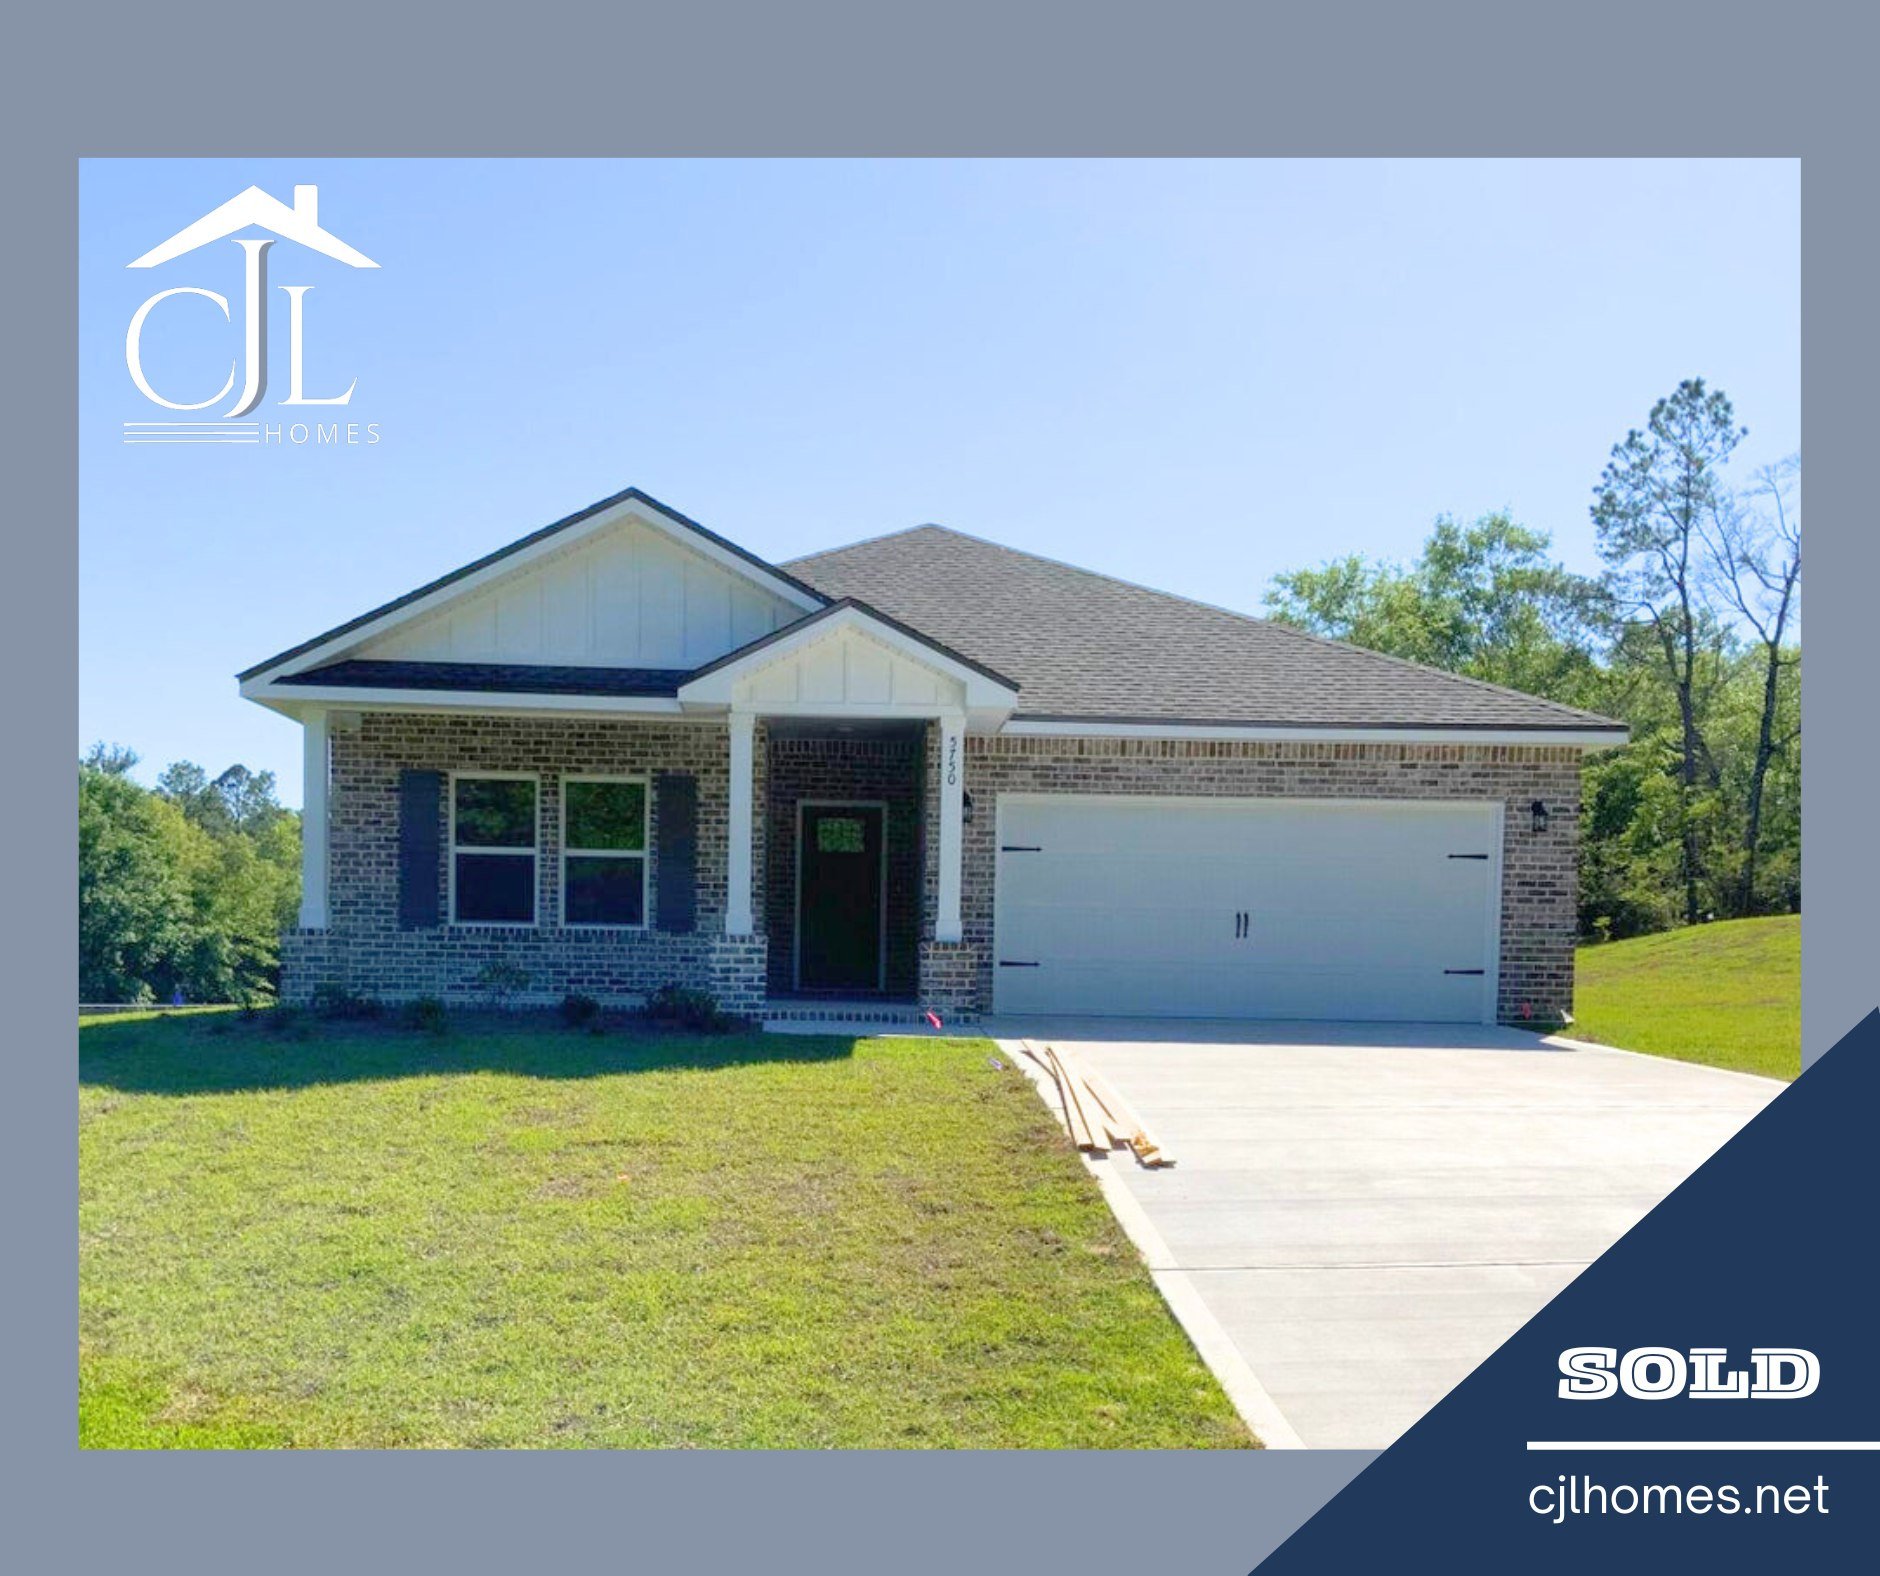 🏡 **SOLD!** 🎉

🌟 Residential Detached Single Family - **SOLD**
💰 Price: $295,000
📍 Address: 5750 Wayne Rogers Road, Crestview, FL 32539

🛏️ 3 Beds | 🛁 2 Baths | 🏡 Craftsman Style | 📐 1 Story | 🏗️ Year Built: 2024
📏 SqFt(Htd/Cooled): 1,500 